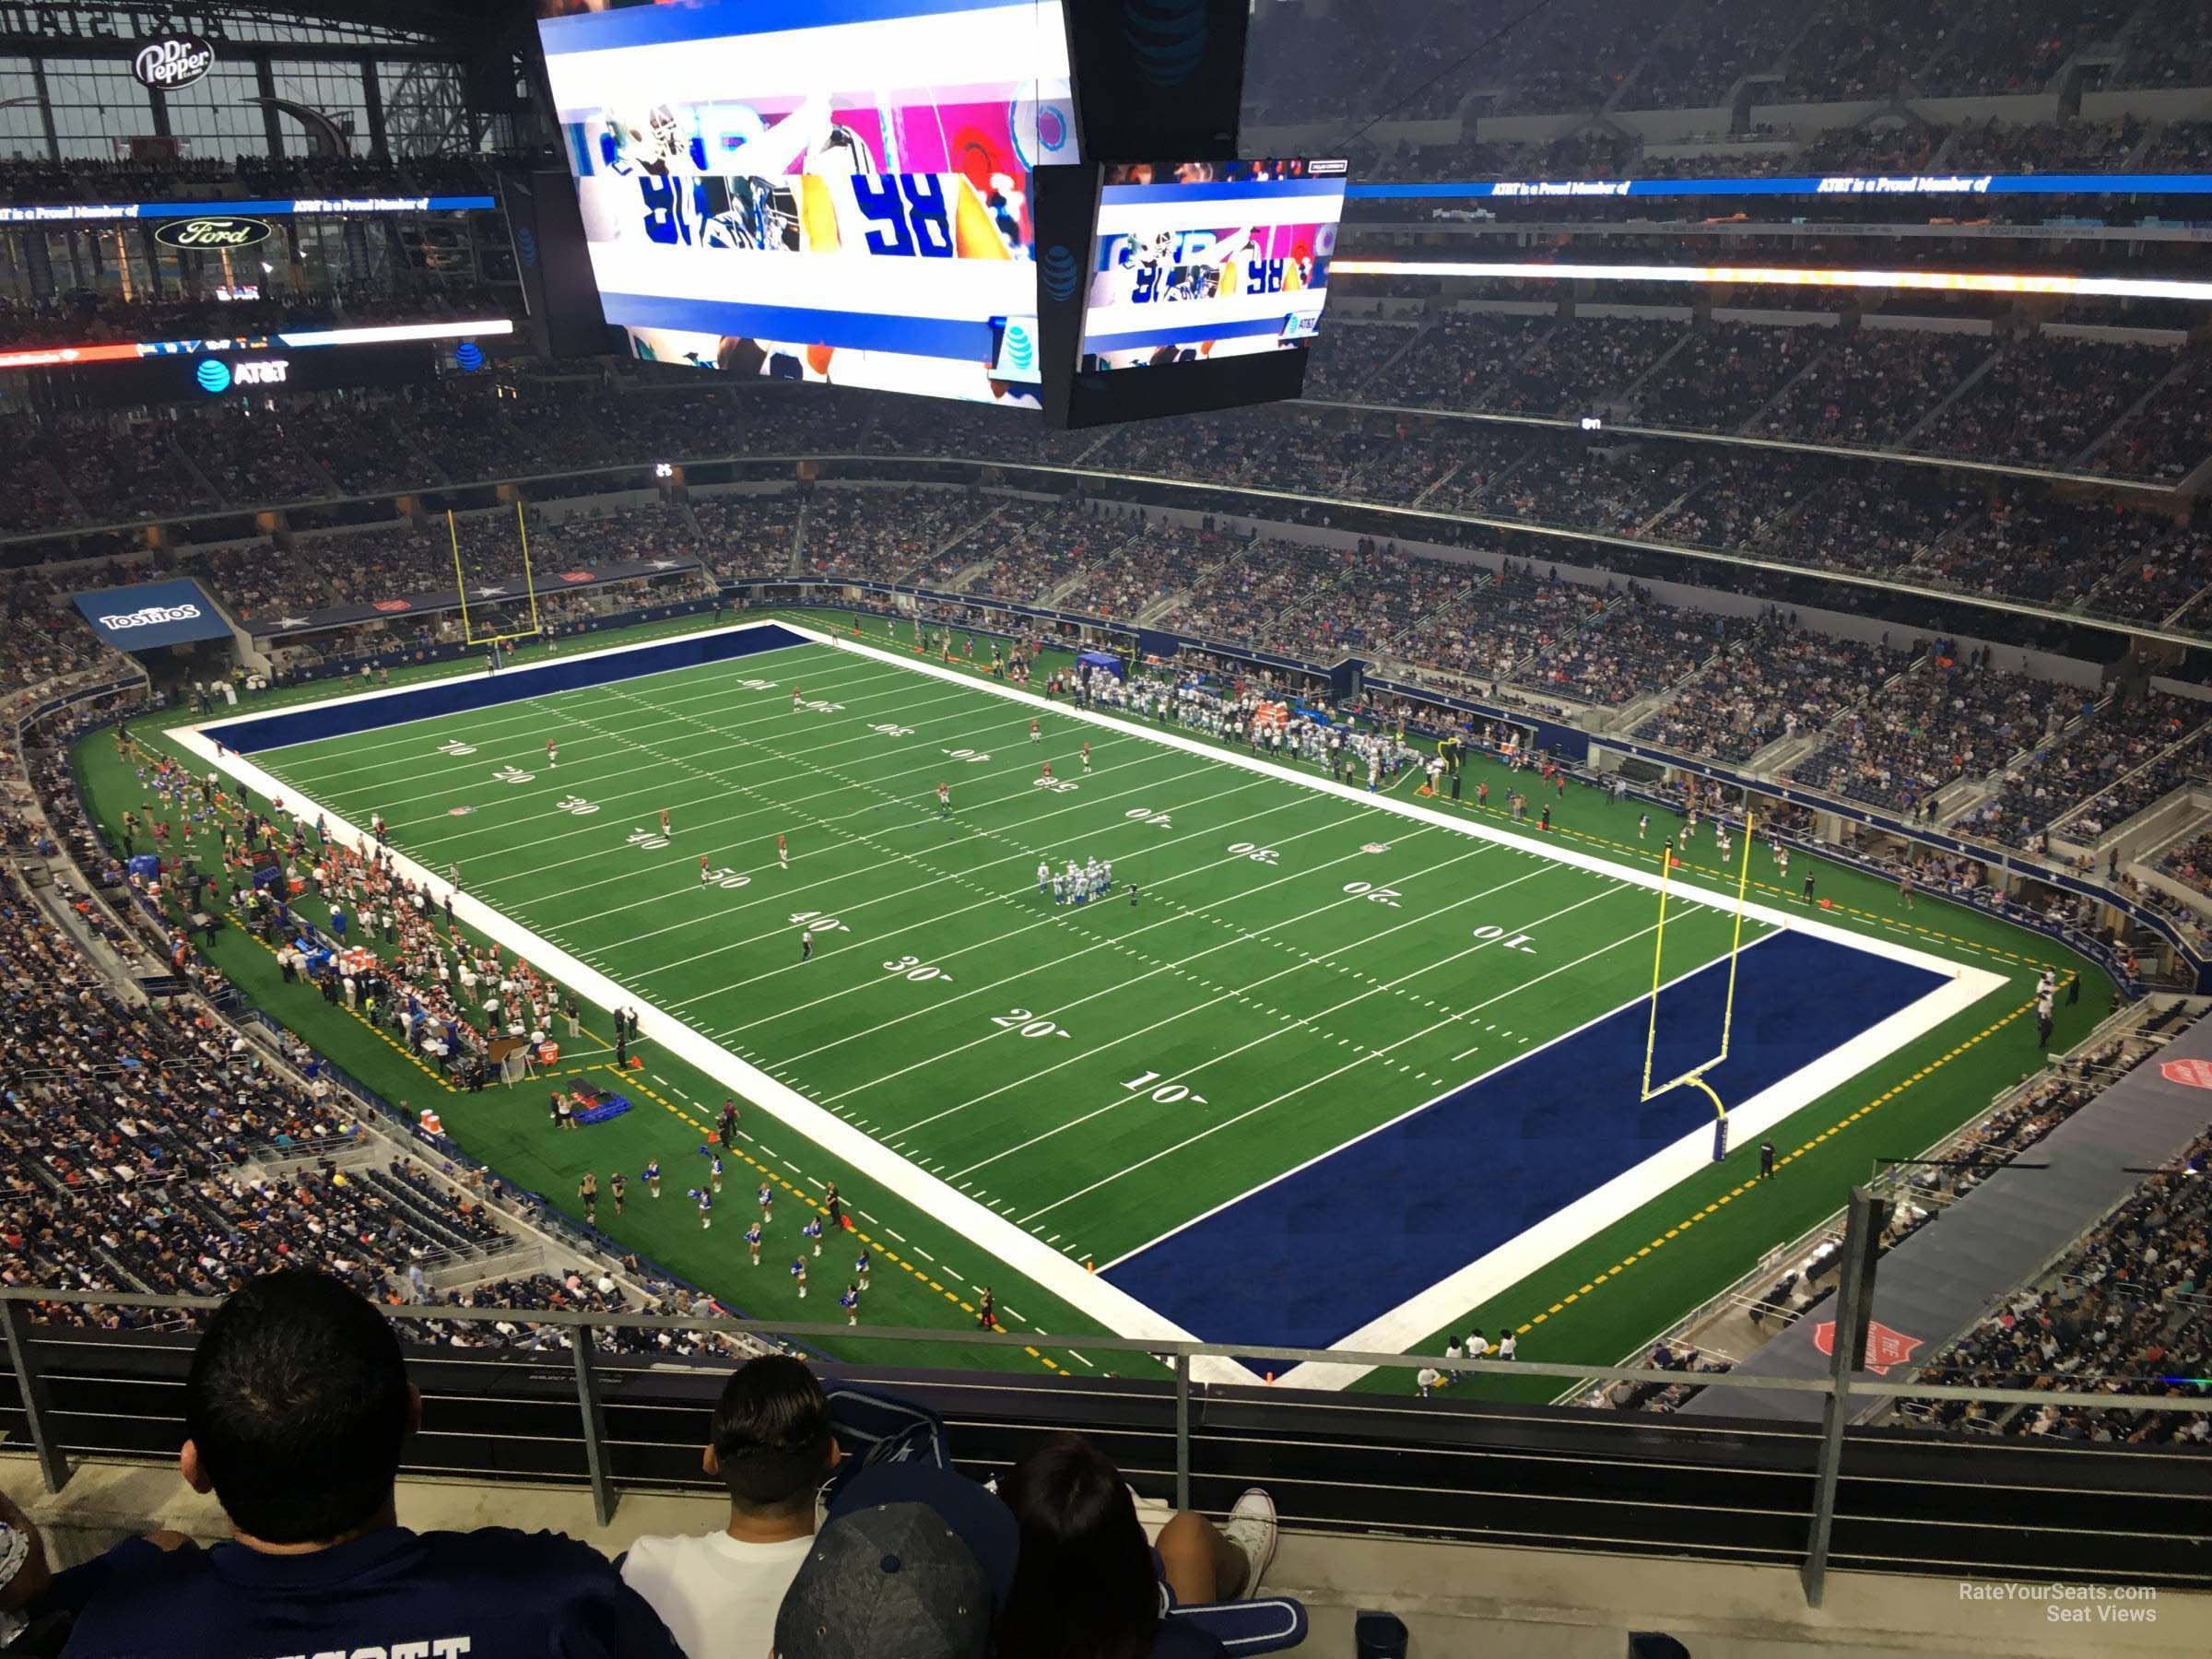 section 434, row 4 seat view  for football - at&t stadium (cowboys stadium)